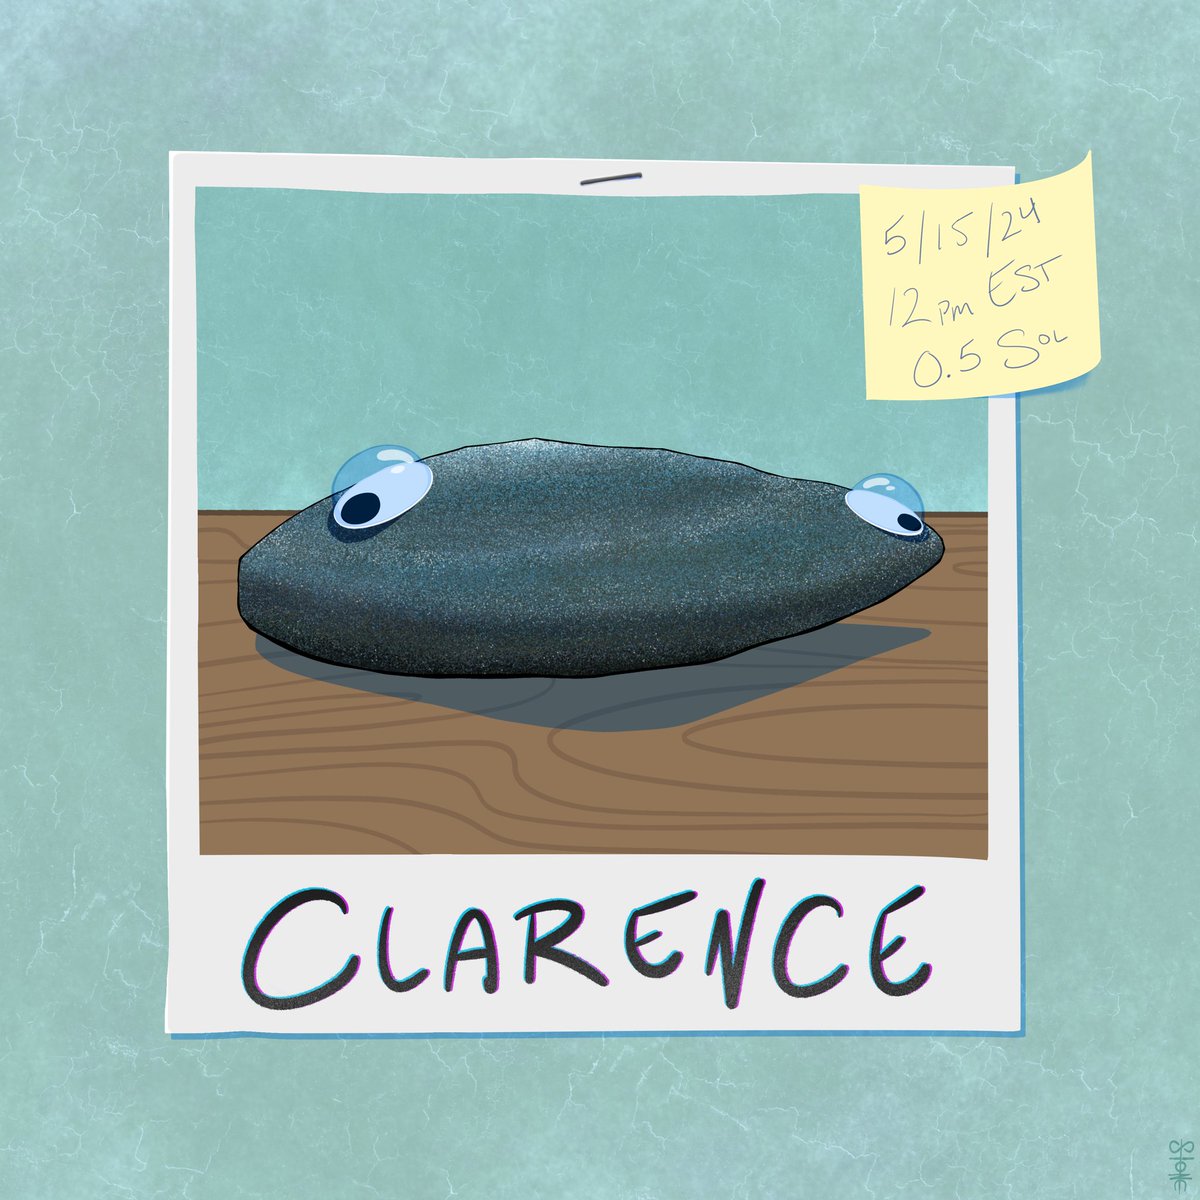 G M Clarence is up for adoption today! 5/15/24 @ 12:00pm EST 0.5 SOL start 3.00 Hours + 10min end phase PET ROCKS 4 SALE No. 1 ⛓️ ⤵️